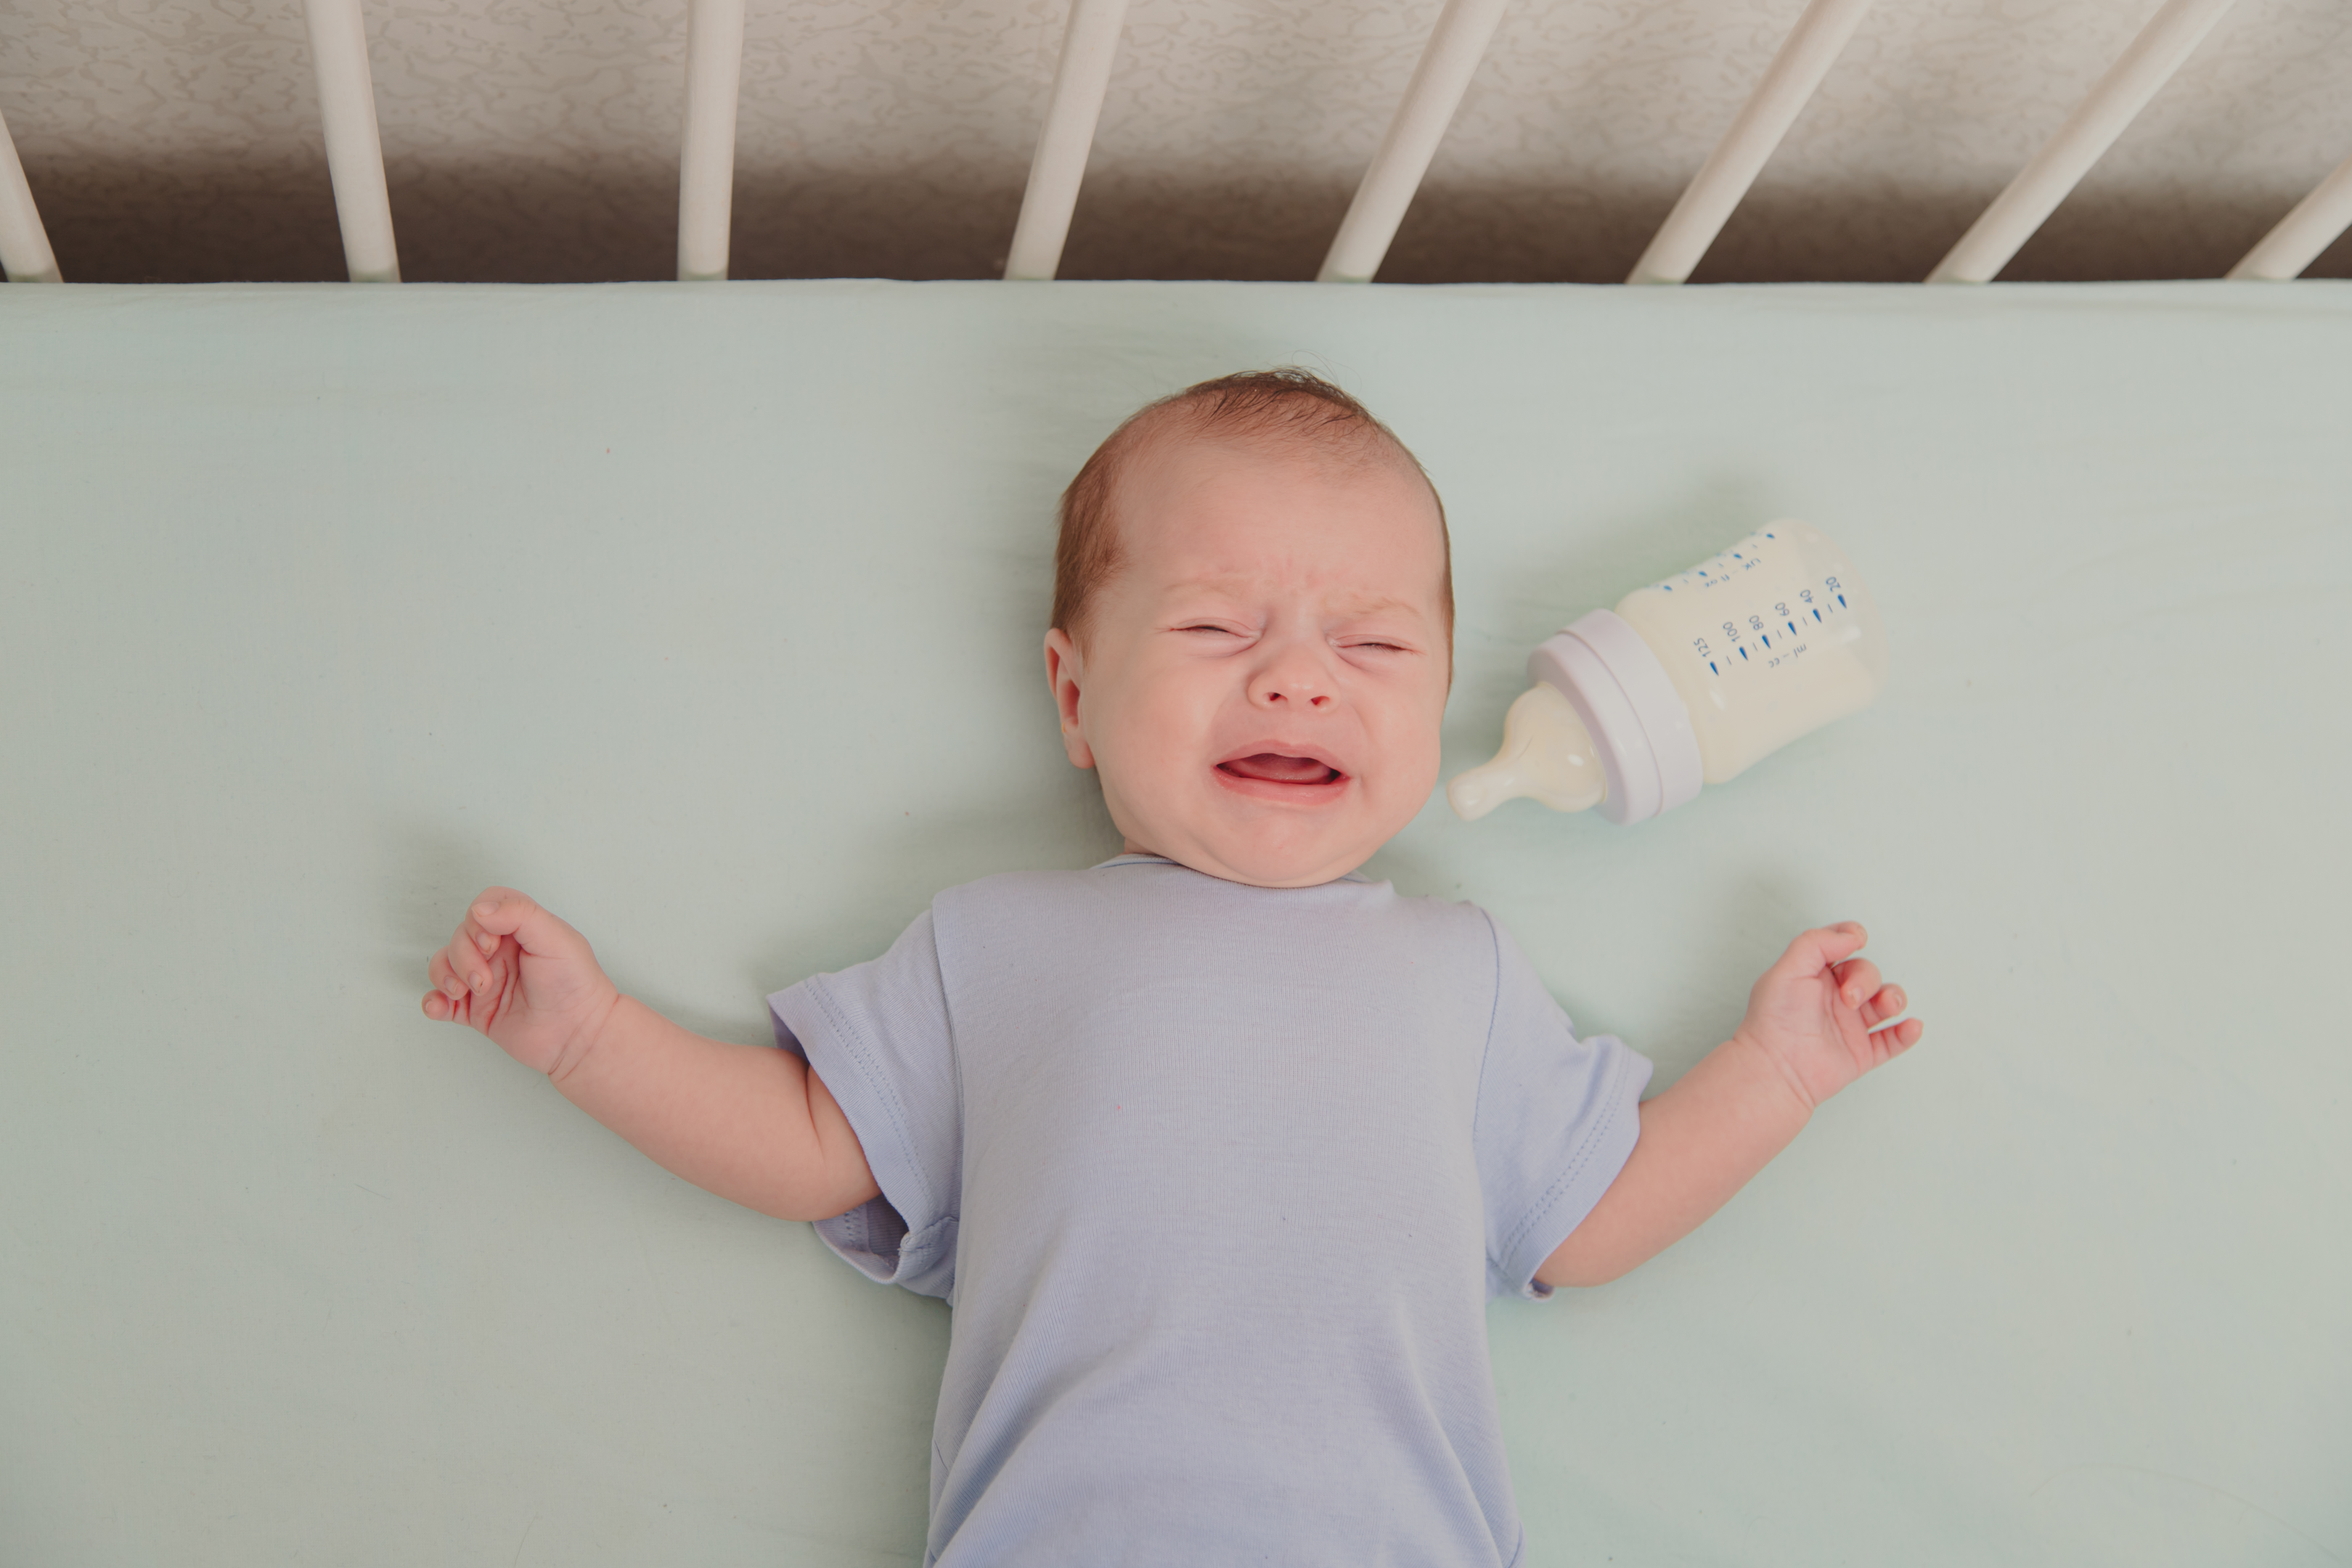 You must understand babies' thermal comfort from physical signs.